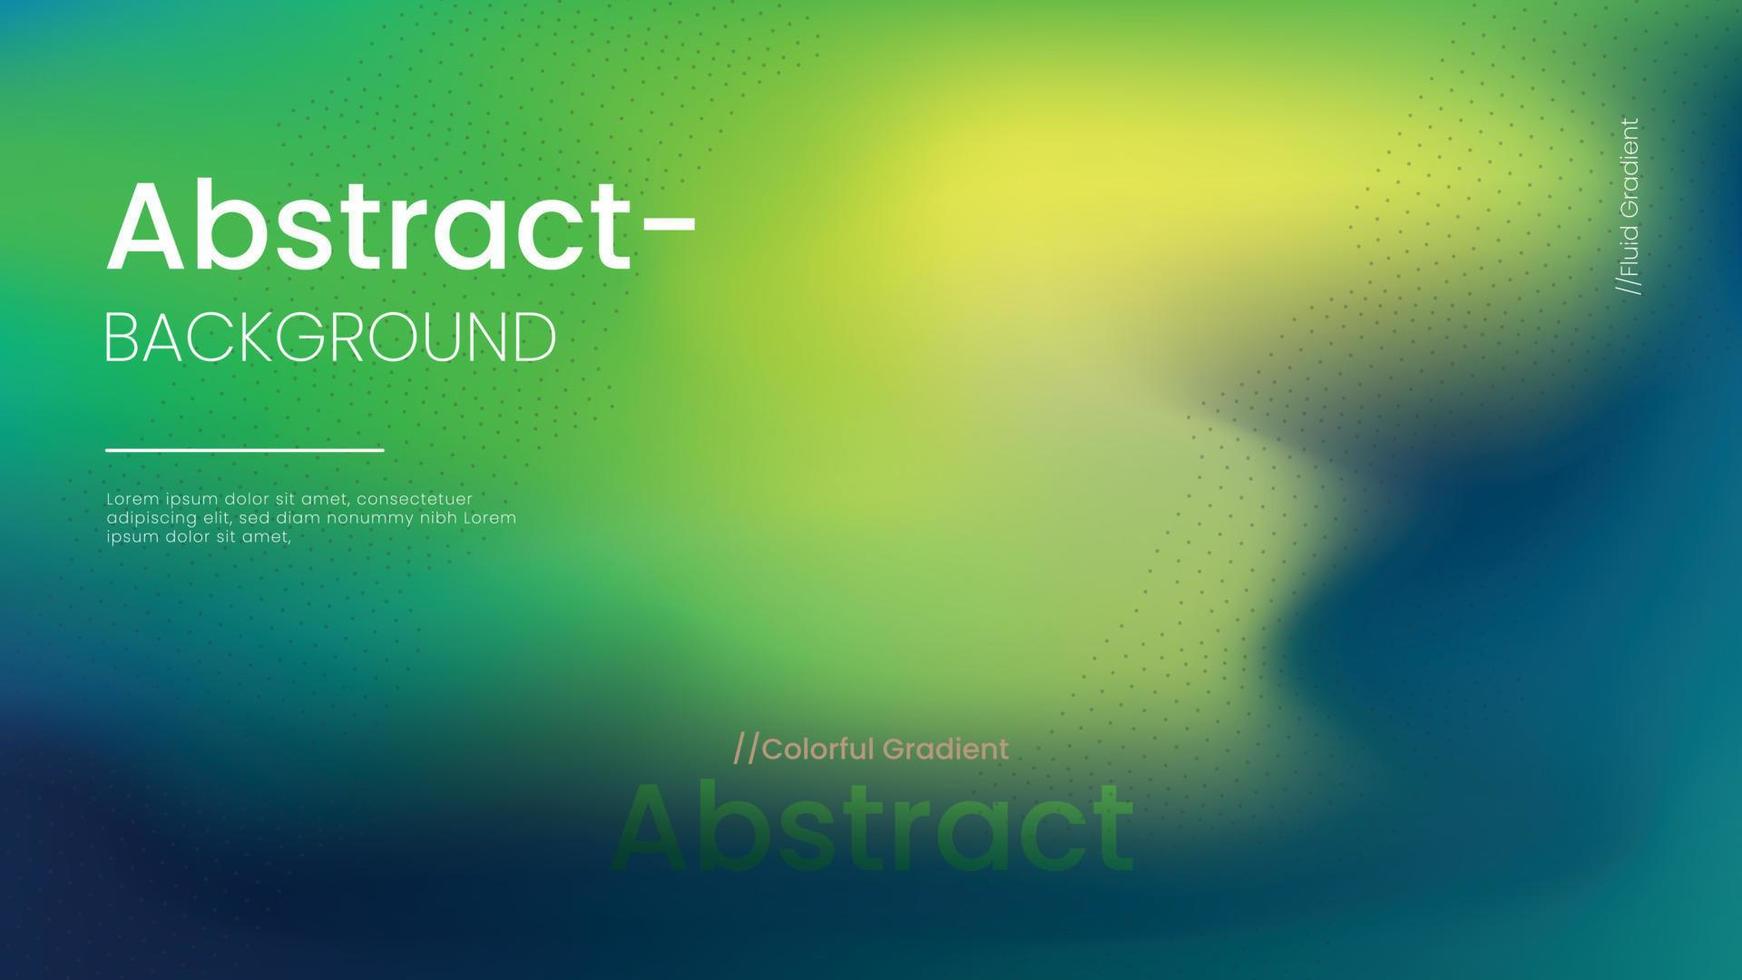 Abstract background with green and blue blurred gradients vector